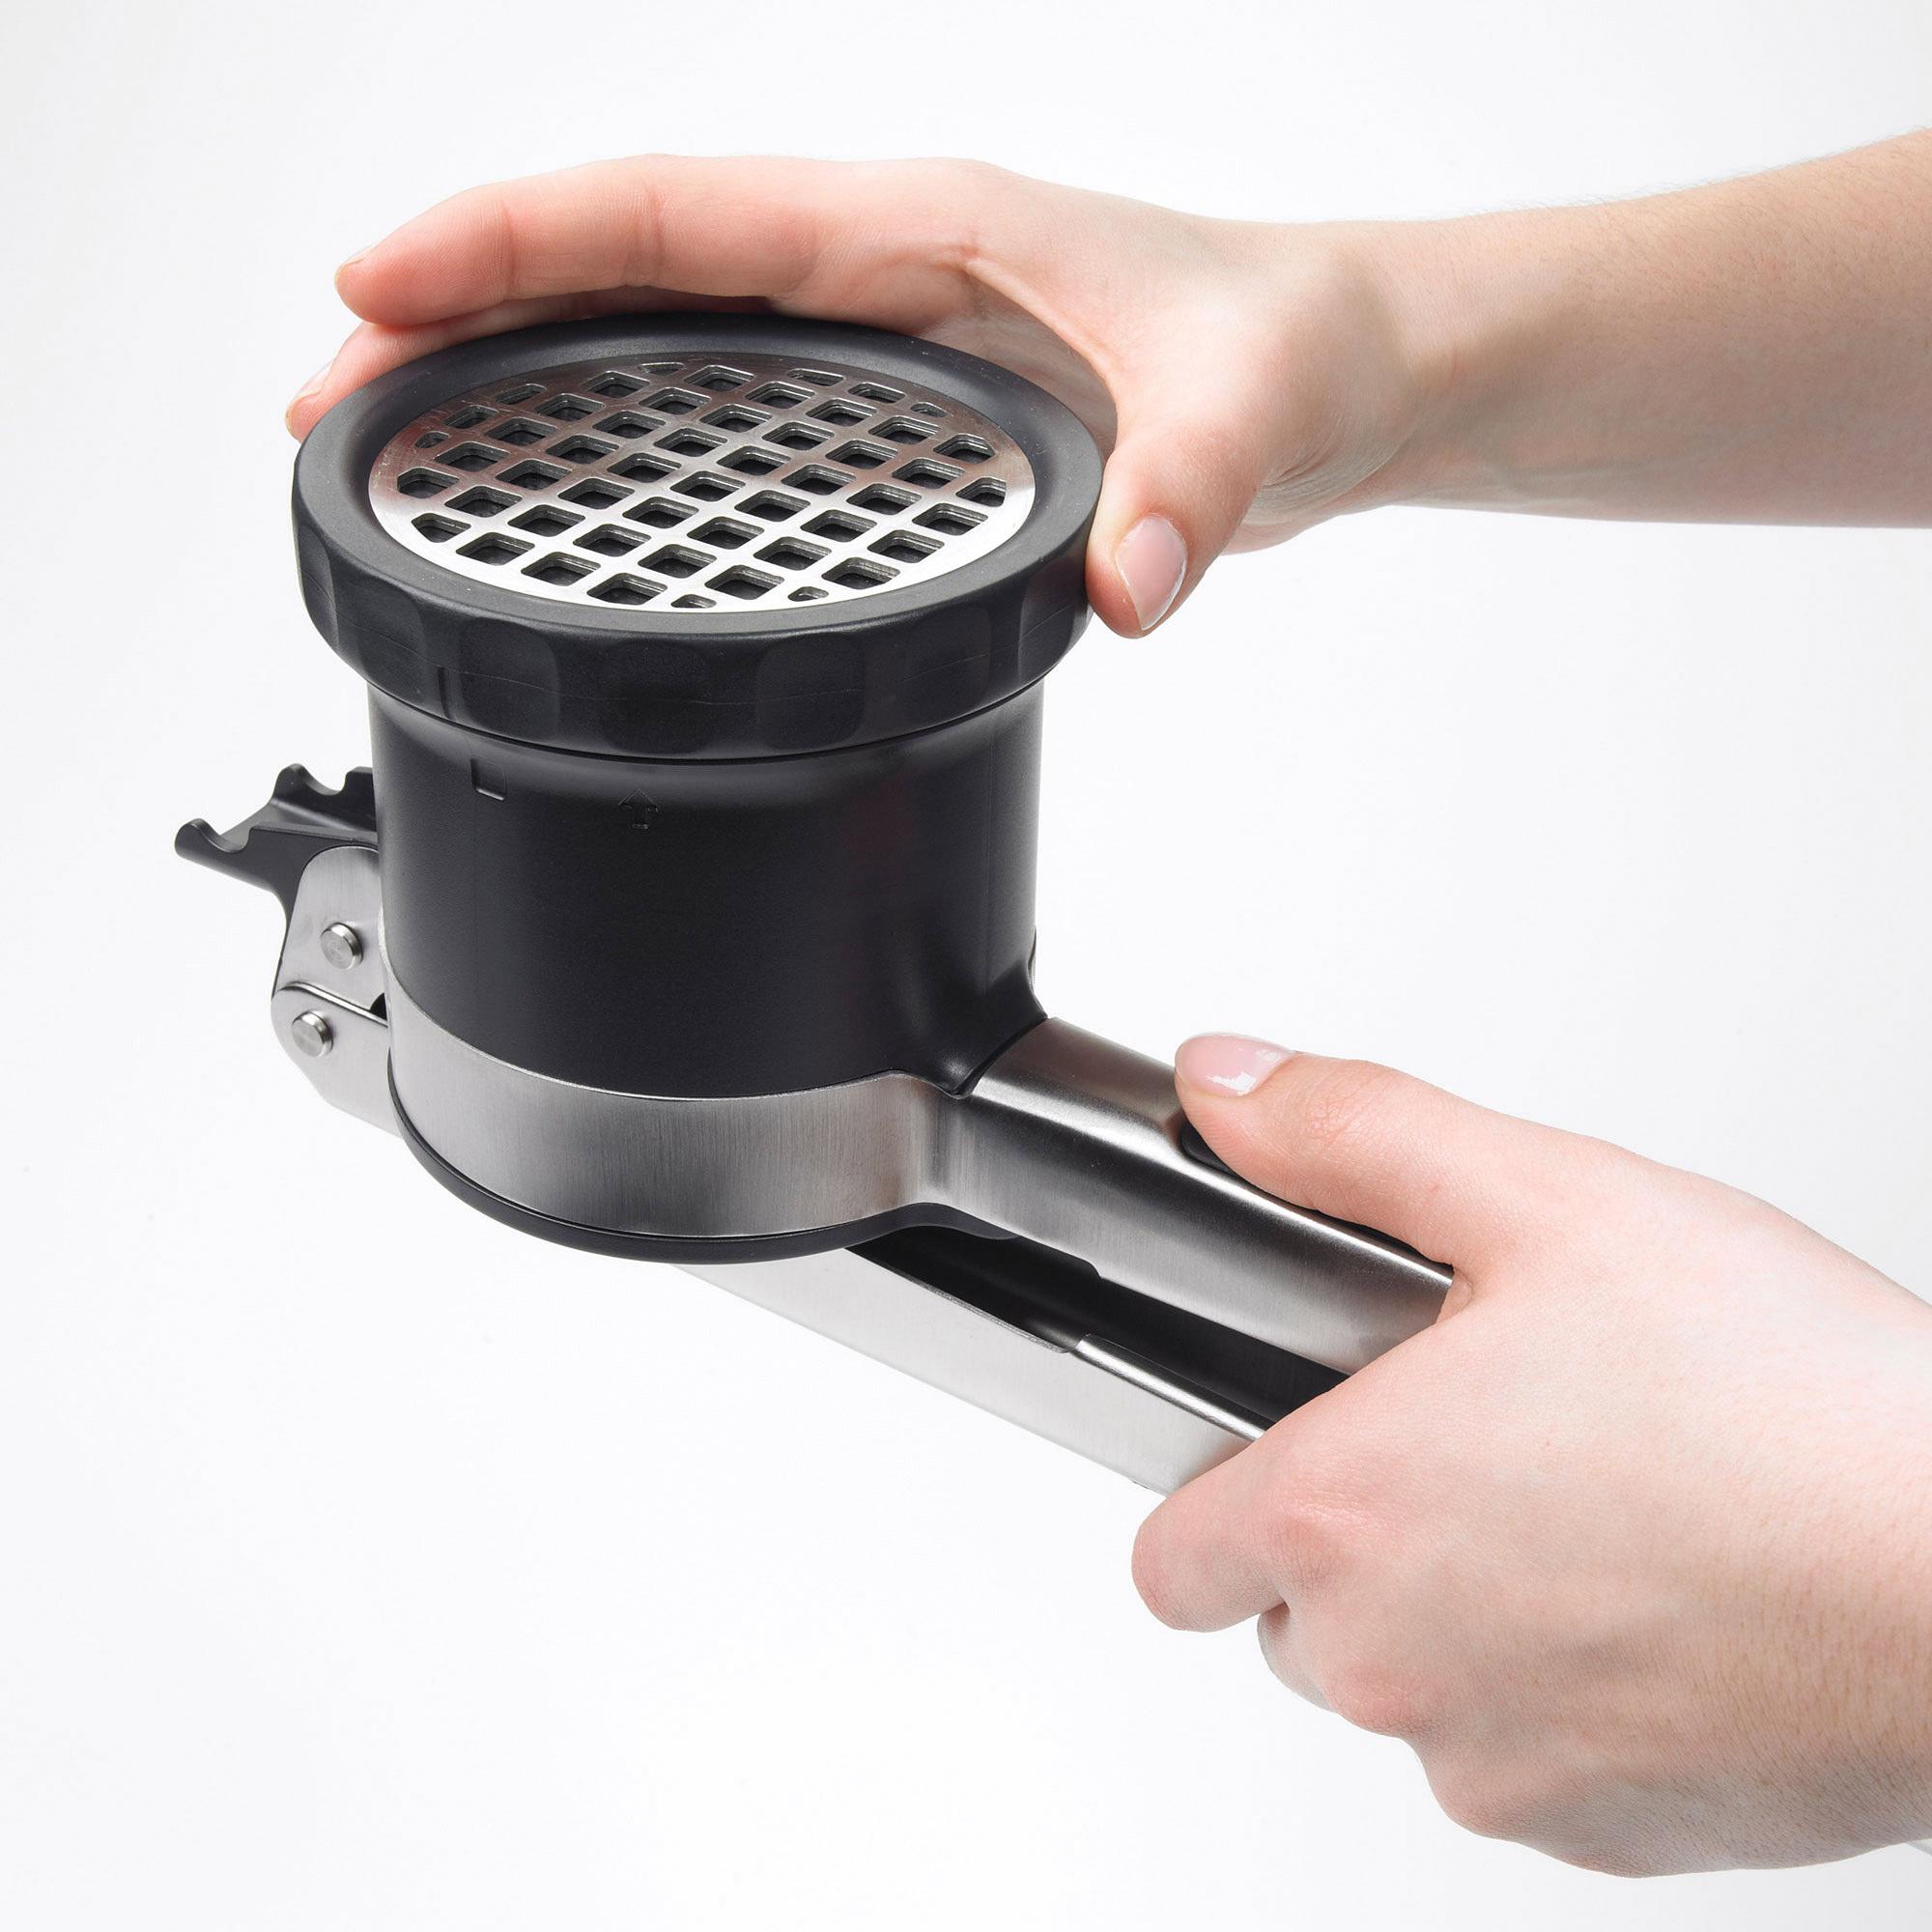 OXO Good Grips 3 in 1 Adjustable Potato Ricer Image 5